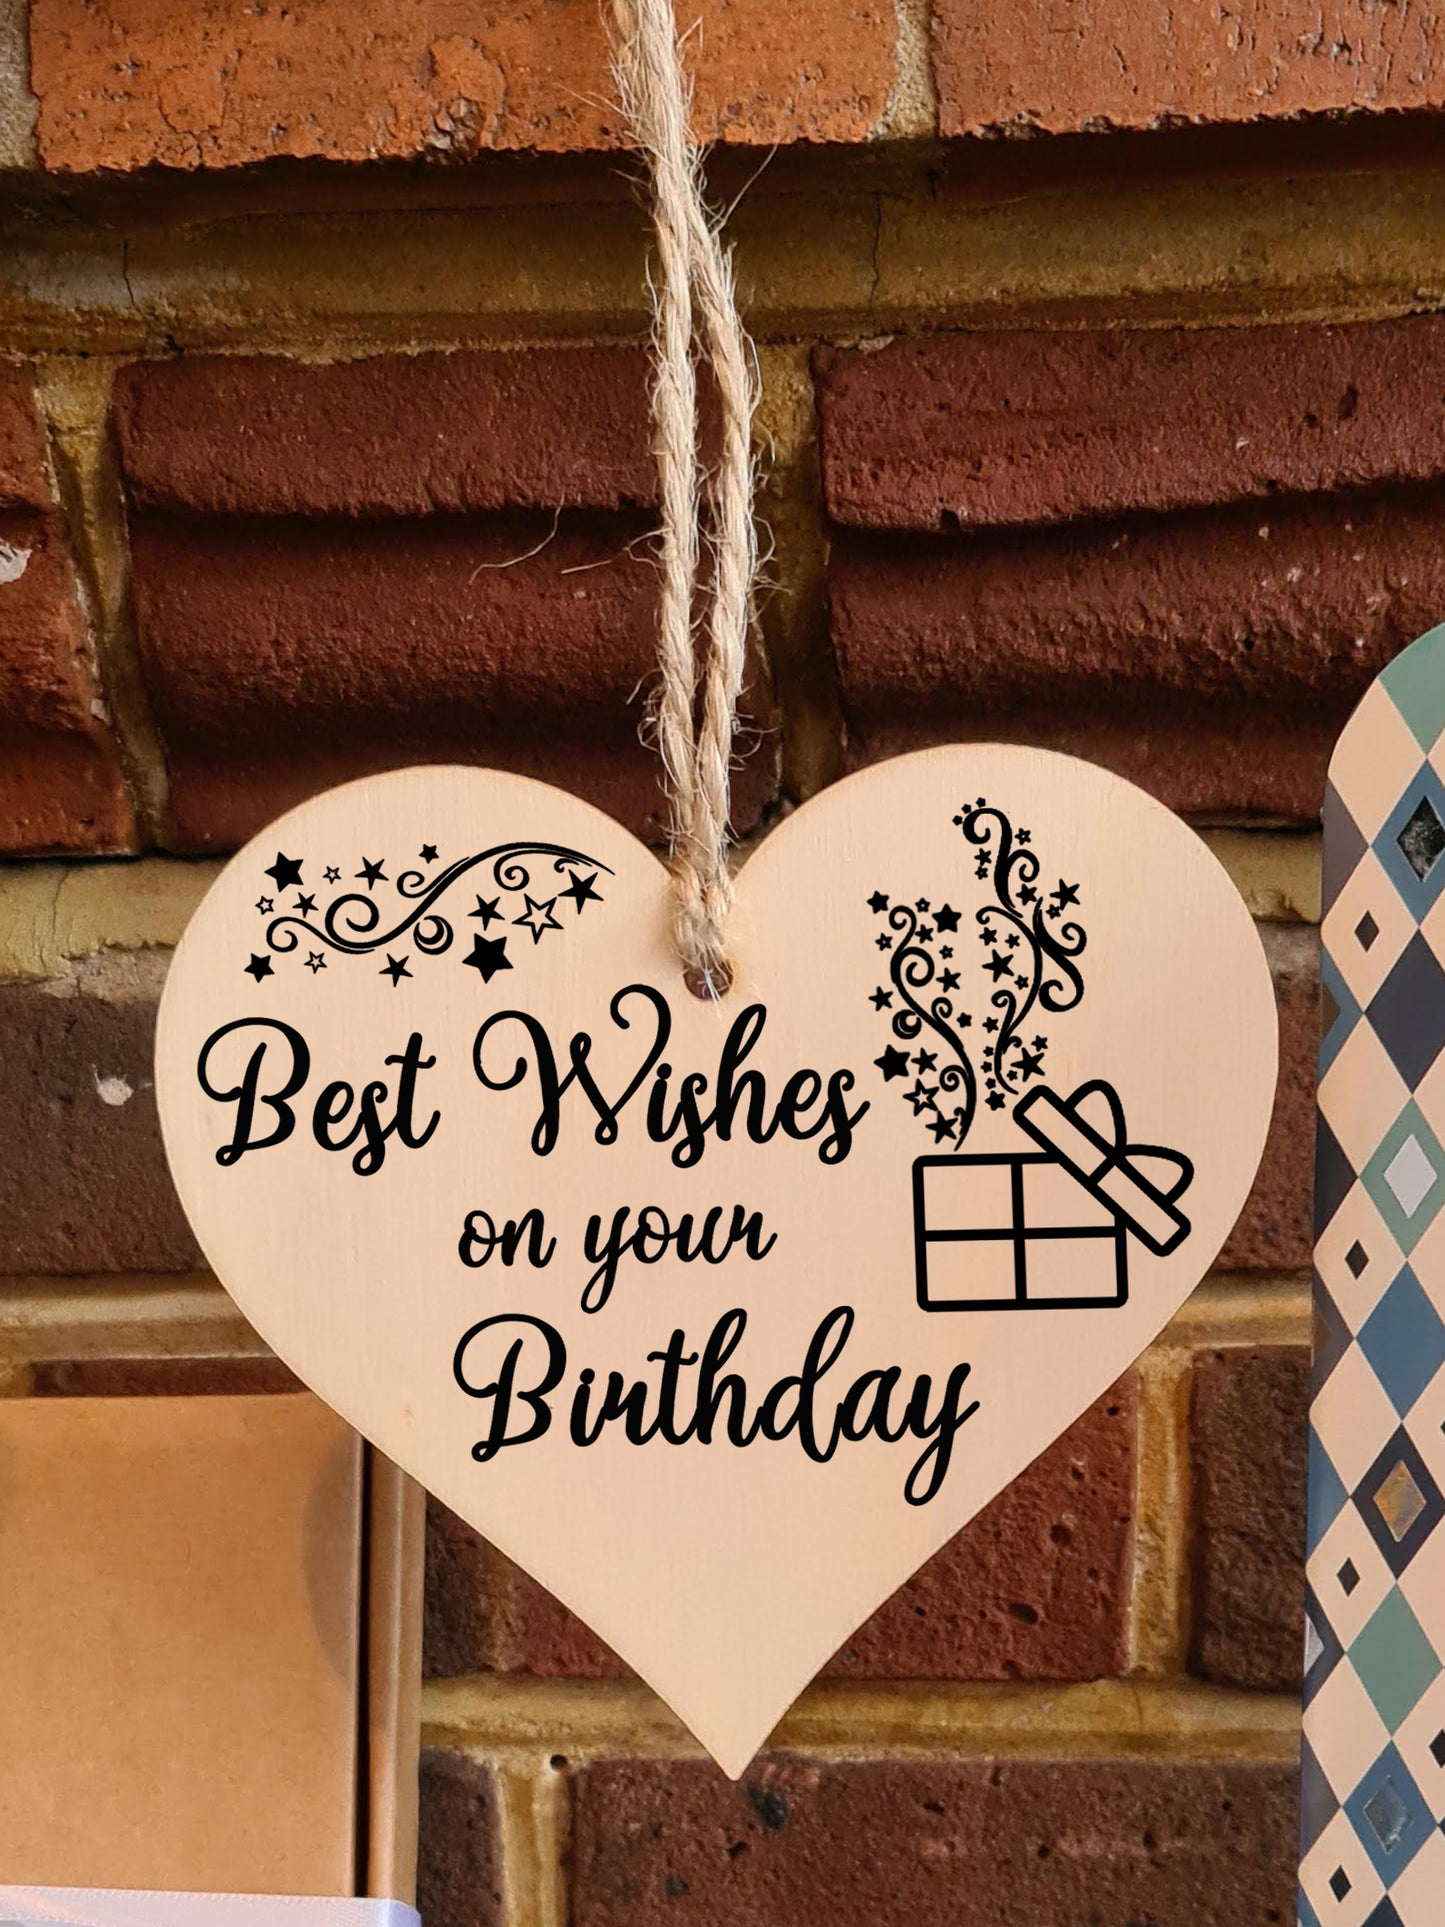 Handmade Wooden Hanging Heart Plaque Gift for Someone Special Birthday Keepsake